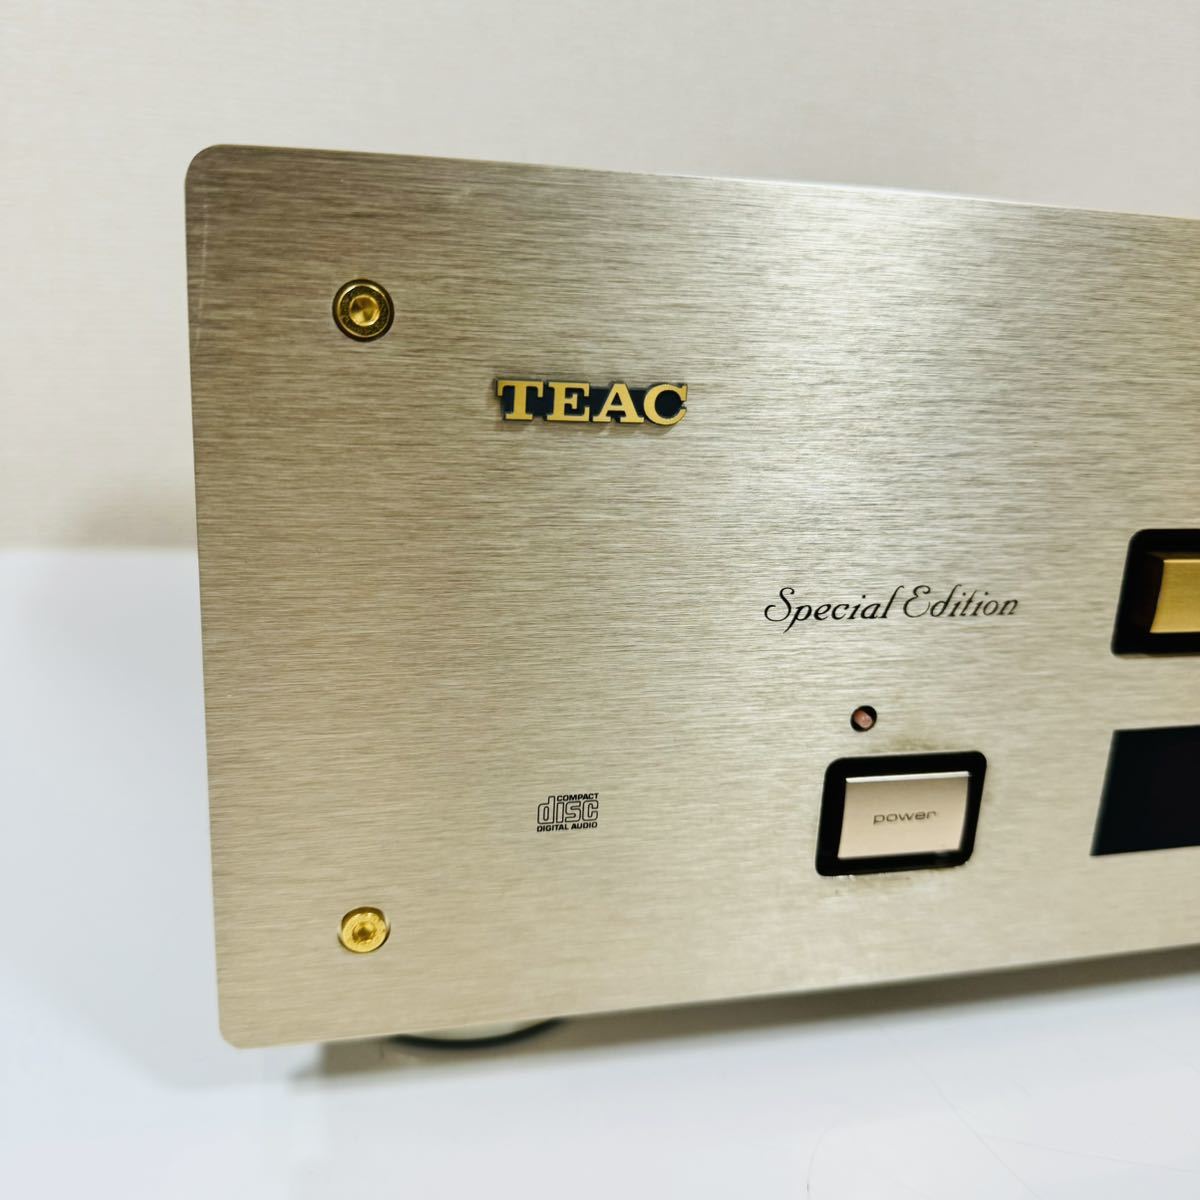 TEAC Teac CD player VRDS-10SE Special Edition (Compact DISC PLAYER audio equipment retro Special Edition )